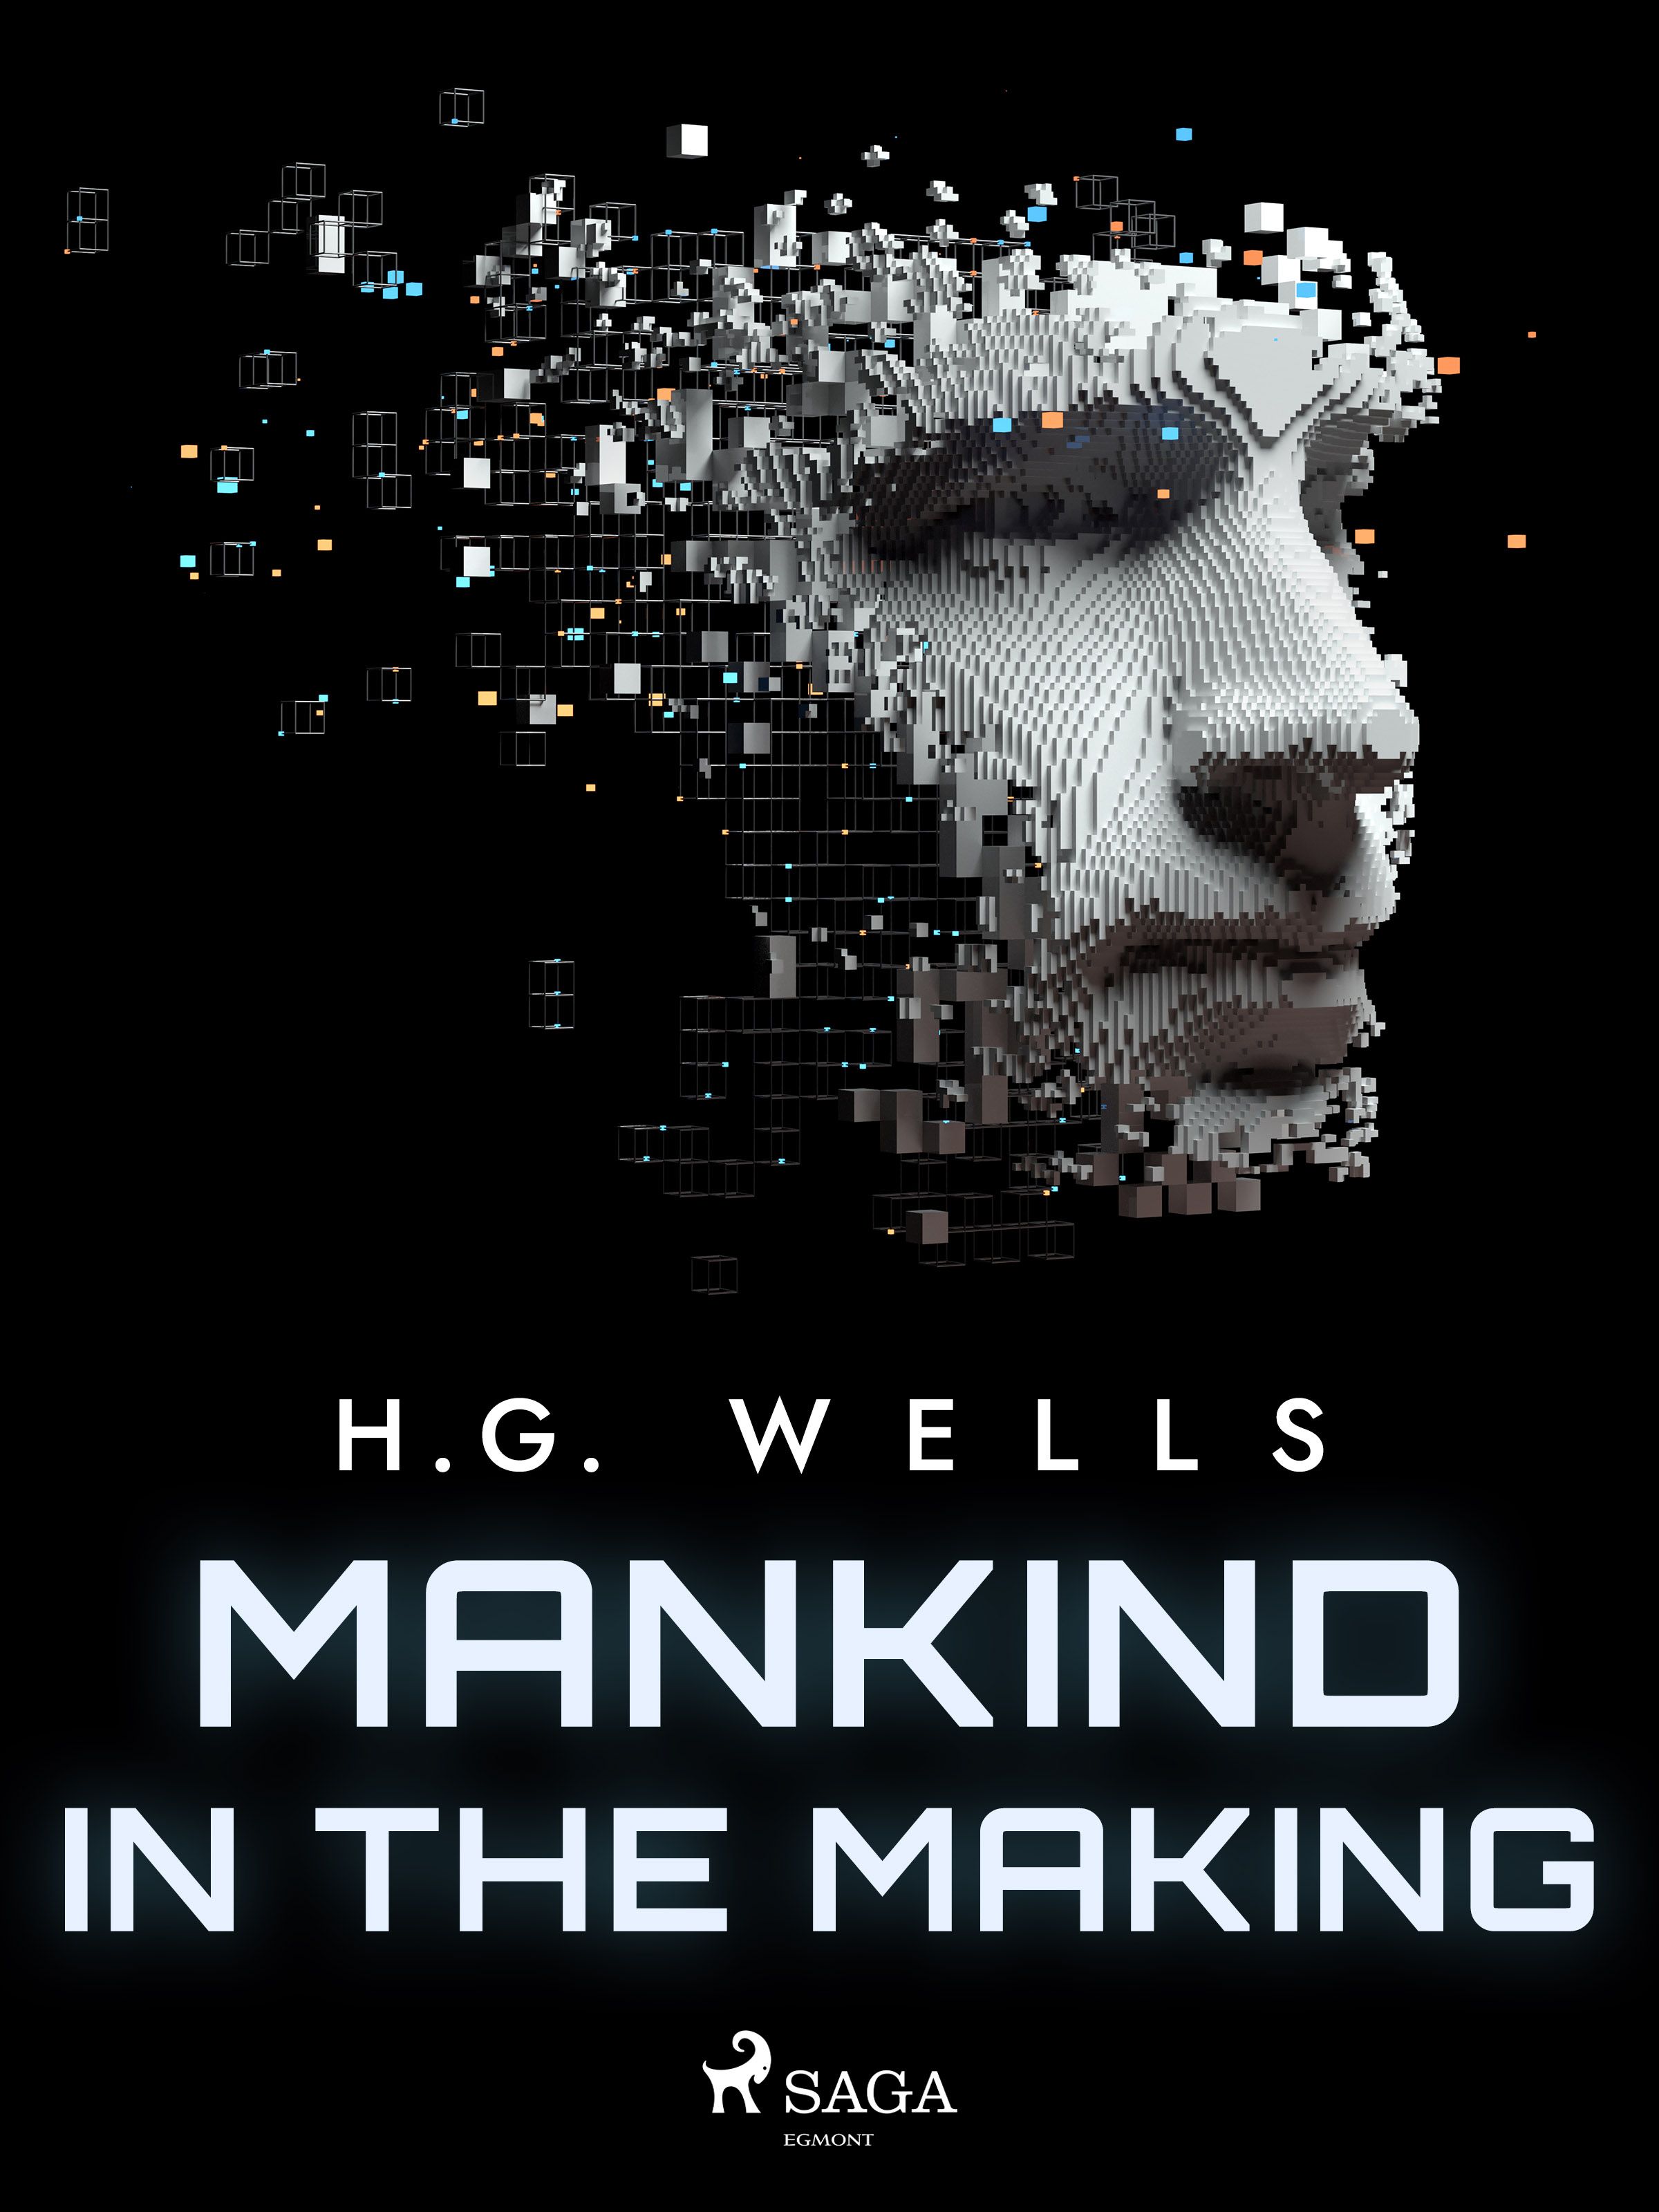 Mankind in the Making, eBook by H. G. Wells